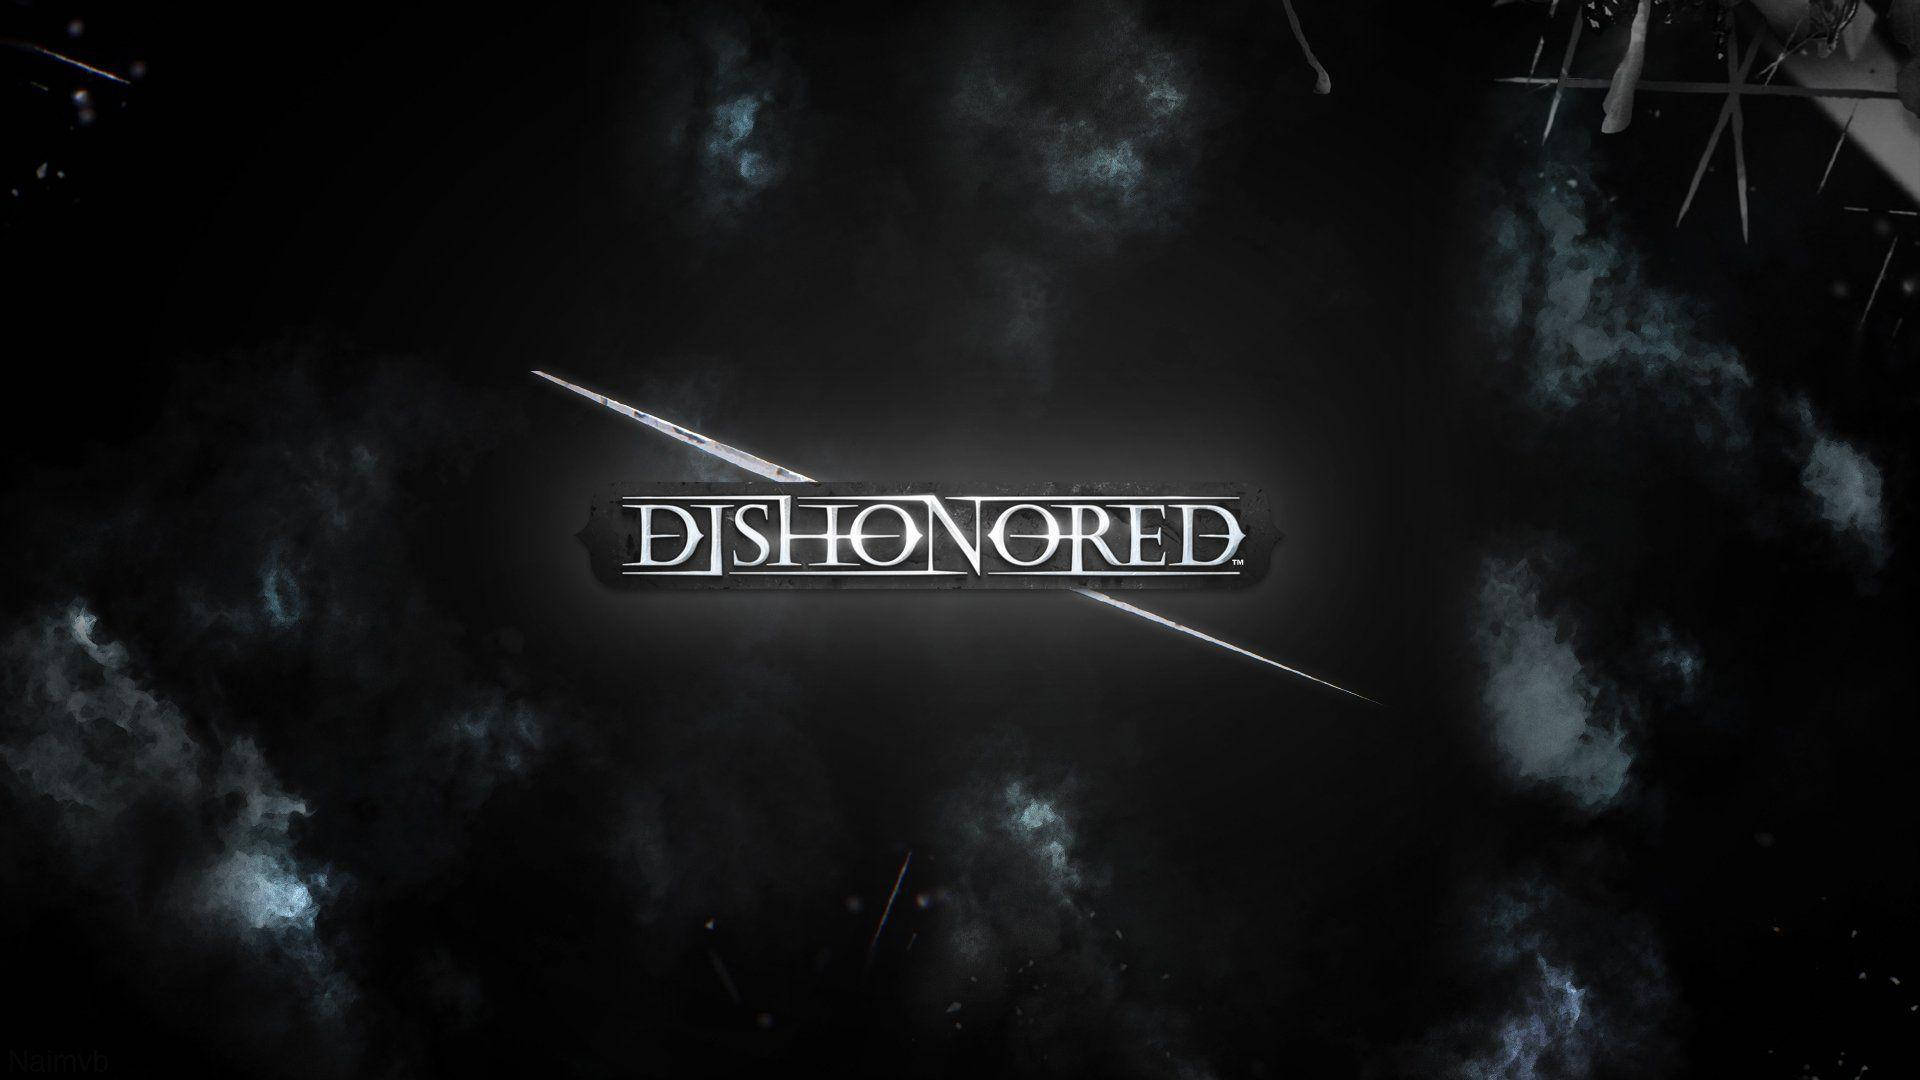 Dishonored Title Poster Wallpaper